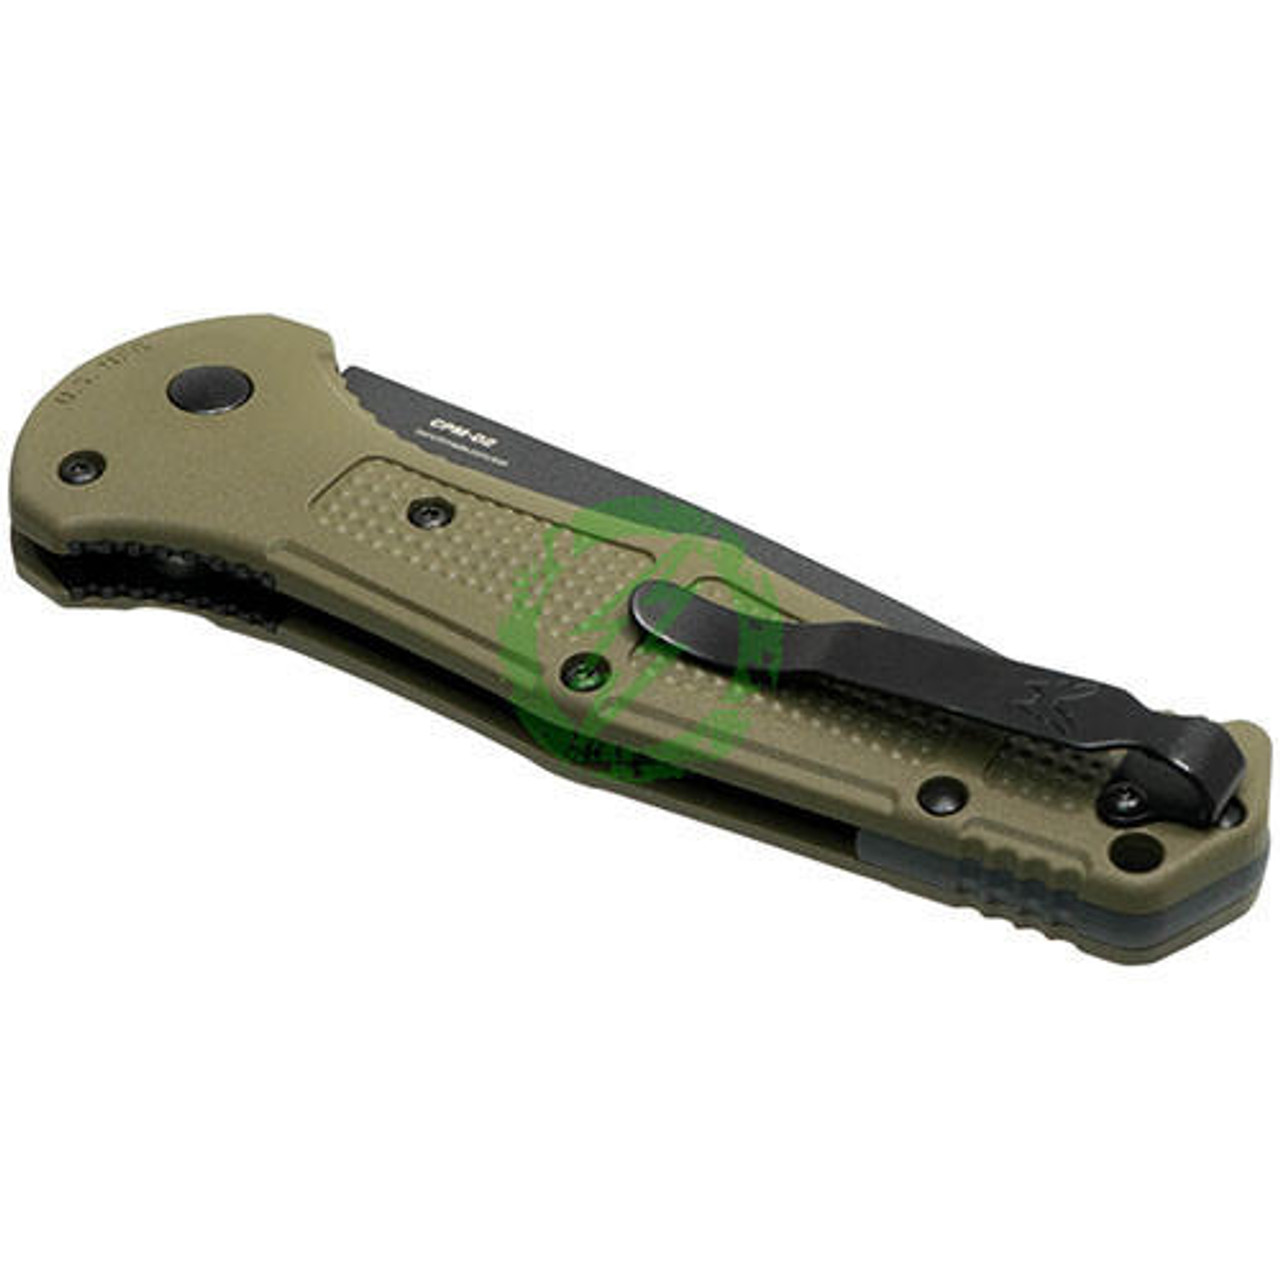  Benchmade Claymore Drop-Point Ranger Green Textured Grivory Stainless Steel 